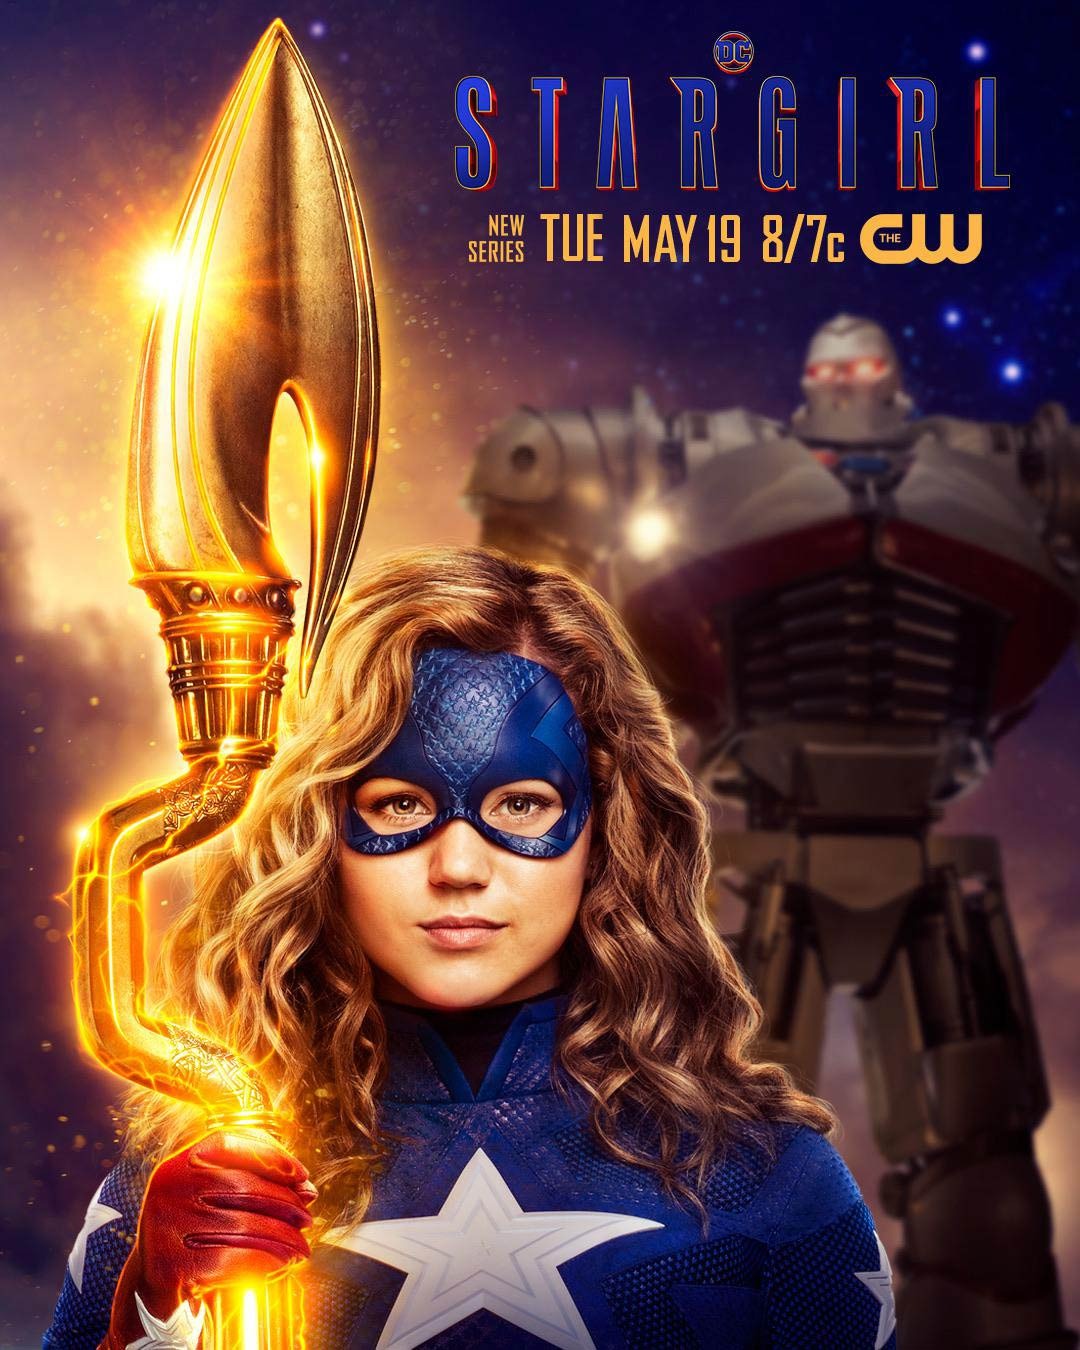 Extra Large TV Poster Image for Stargirl (#3 of 23)